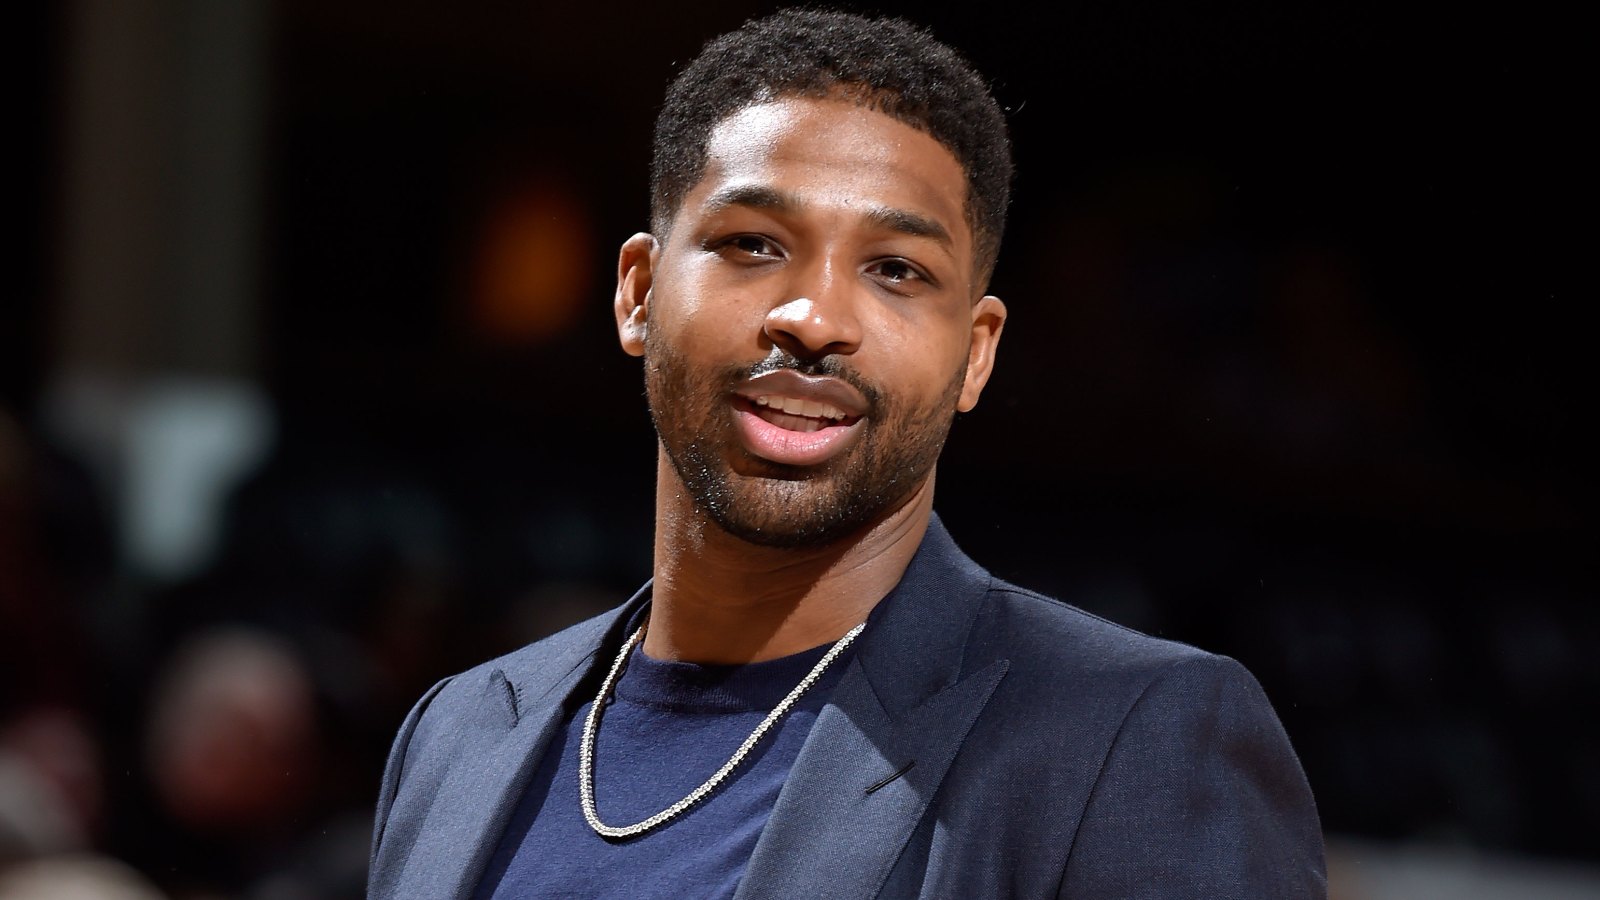 Tristan Thompson Spotted Flirting With Girls at L.A. Bar on Valentine's Day